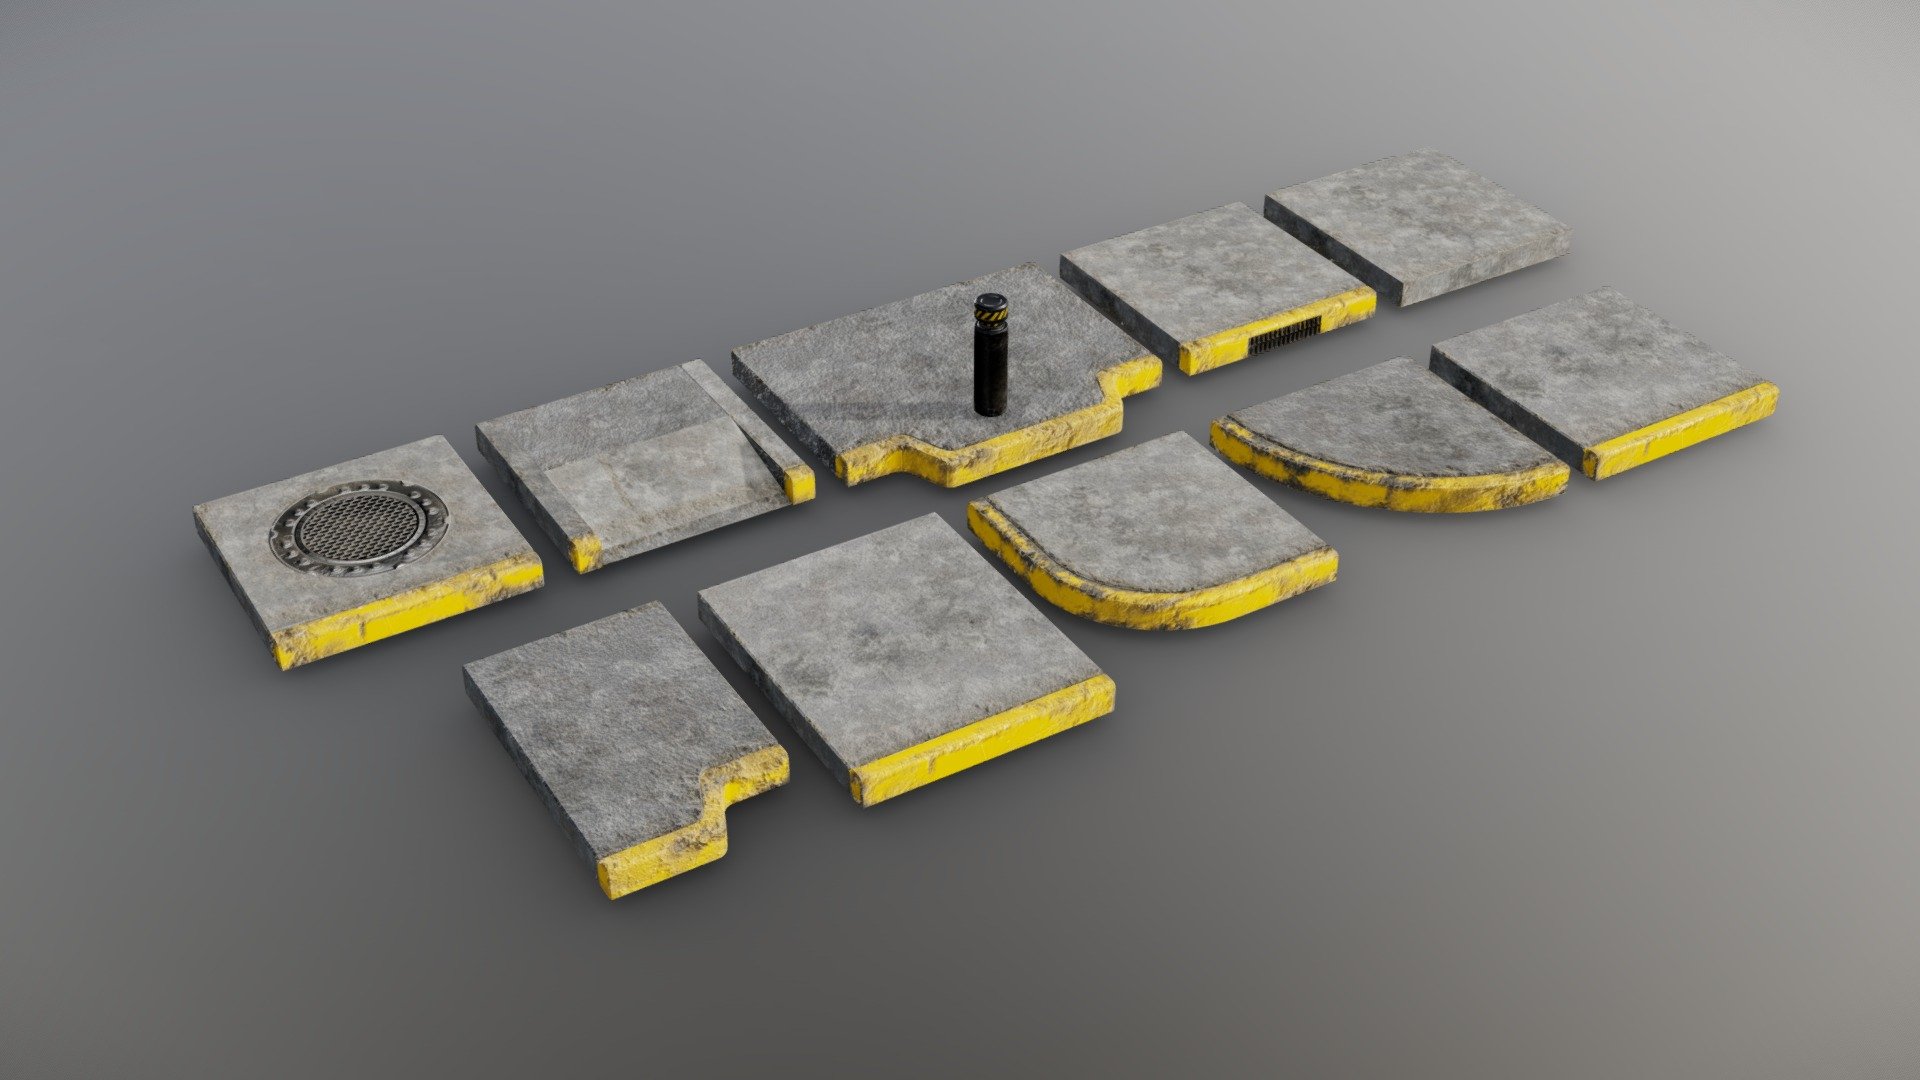 3d Street Props models pack - Sidewalk Edition with high definition and realism, ideal for archviz scenes, each module has a specific feature and a baked map for each geometry that simulates separate slabs.

Includes: 




3D model

Scene example

Final assets

4k textures (embedded in the blender file to avoid the process of reinstalling them).

File versions 3.1 and 2.83

COLLADA format

FBX format

Thumbnails

*Note: See example video where you can see the loaded file as it is for sale, it shows the assets and the file as it will be opened when purchased.

PS : It is recommended to use the .blend file of version 3.1 as it has much better quality and is the original file in which the model was created.* - Street Props - Sidewalk - Buy Royalty Free 3D model by JLRIN (@CraneoJL) 3d model